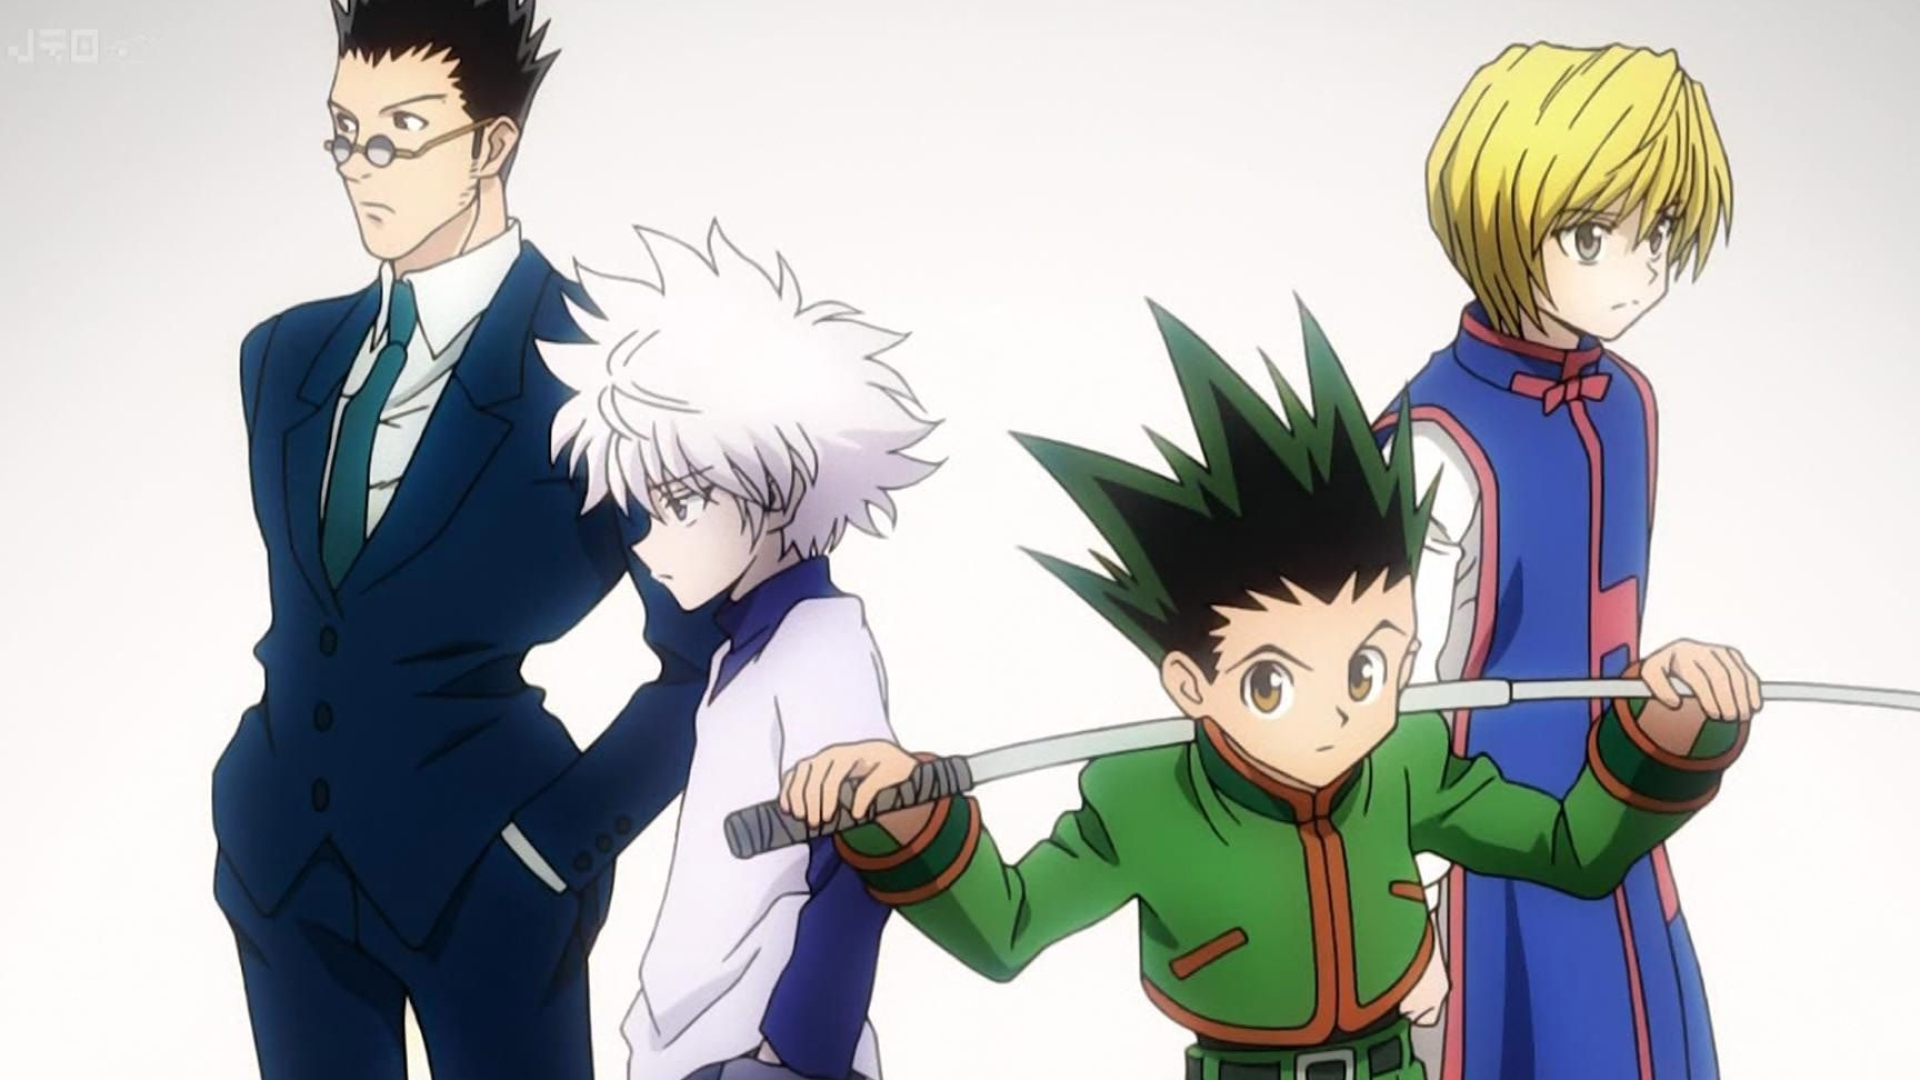 Hunter x Hunter, Collection of wallpapers, Anime fan favorite, Visual variety, 1920x1080 Full HD Desktop